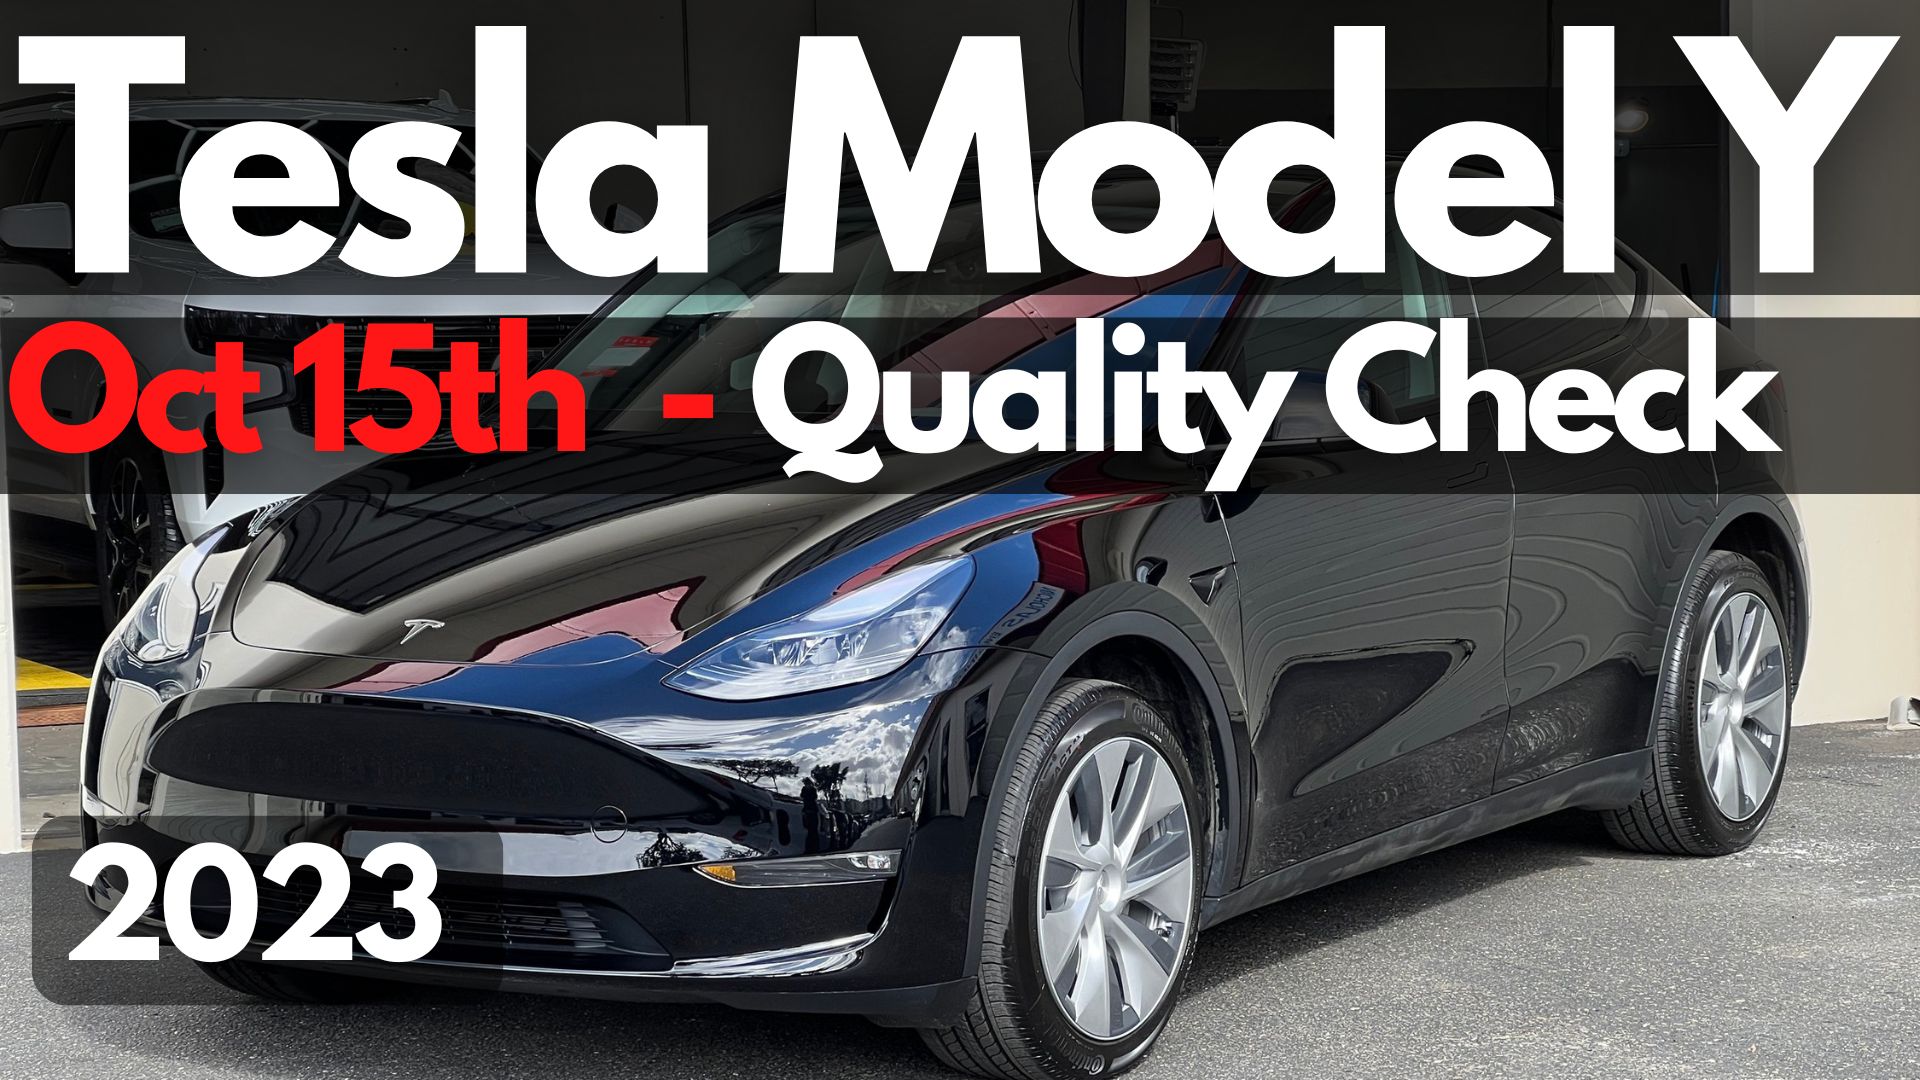 Has Tesla Improved The Model Y Build Quality For Oct 15th, 2023?